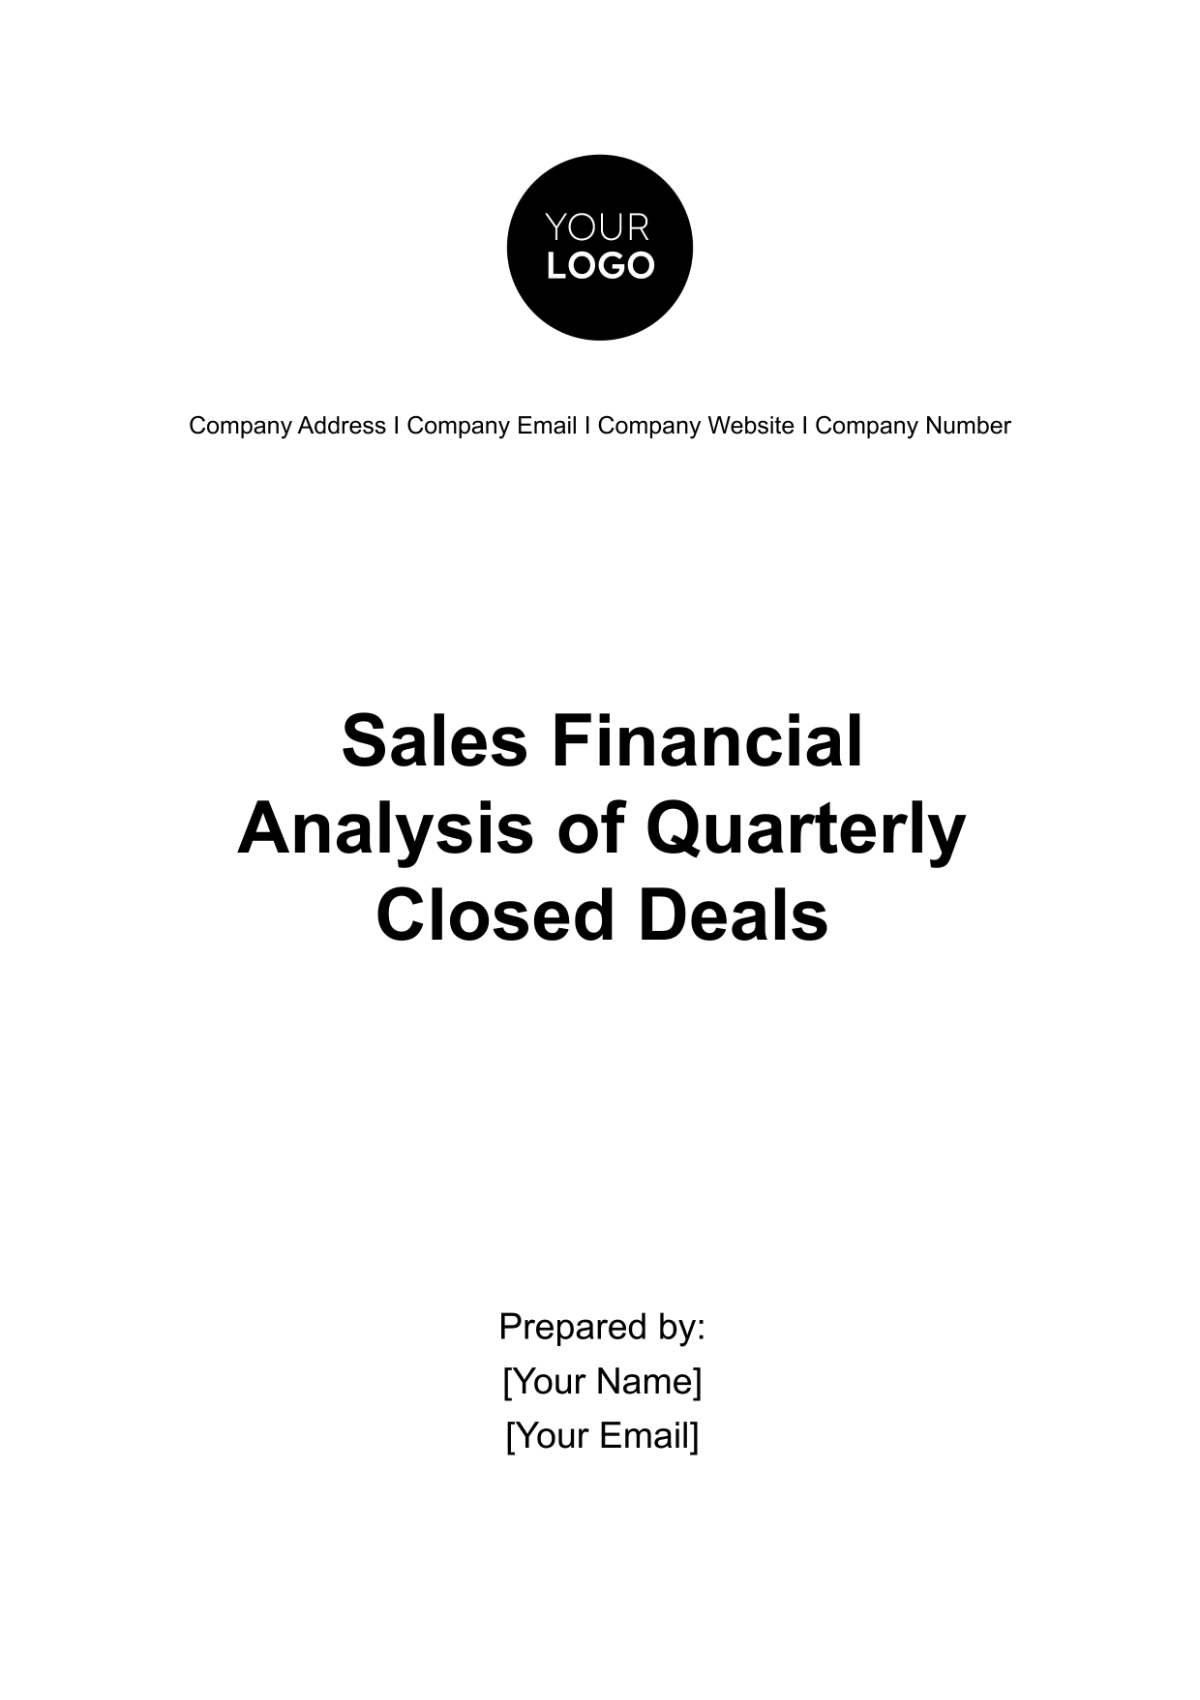 Sales Financial Analysis of Quarterly Closed Deals Template